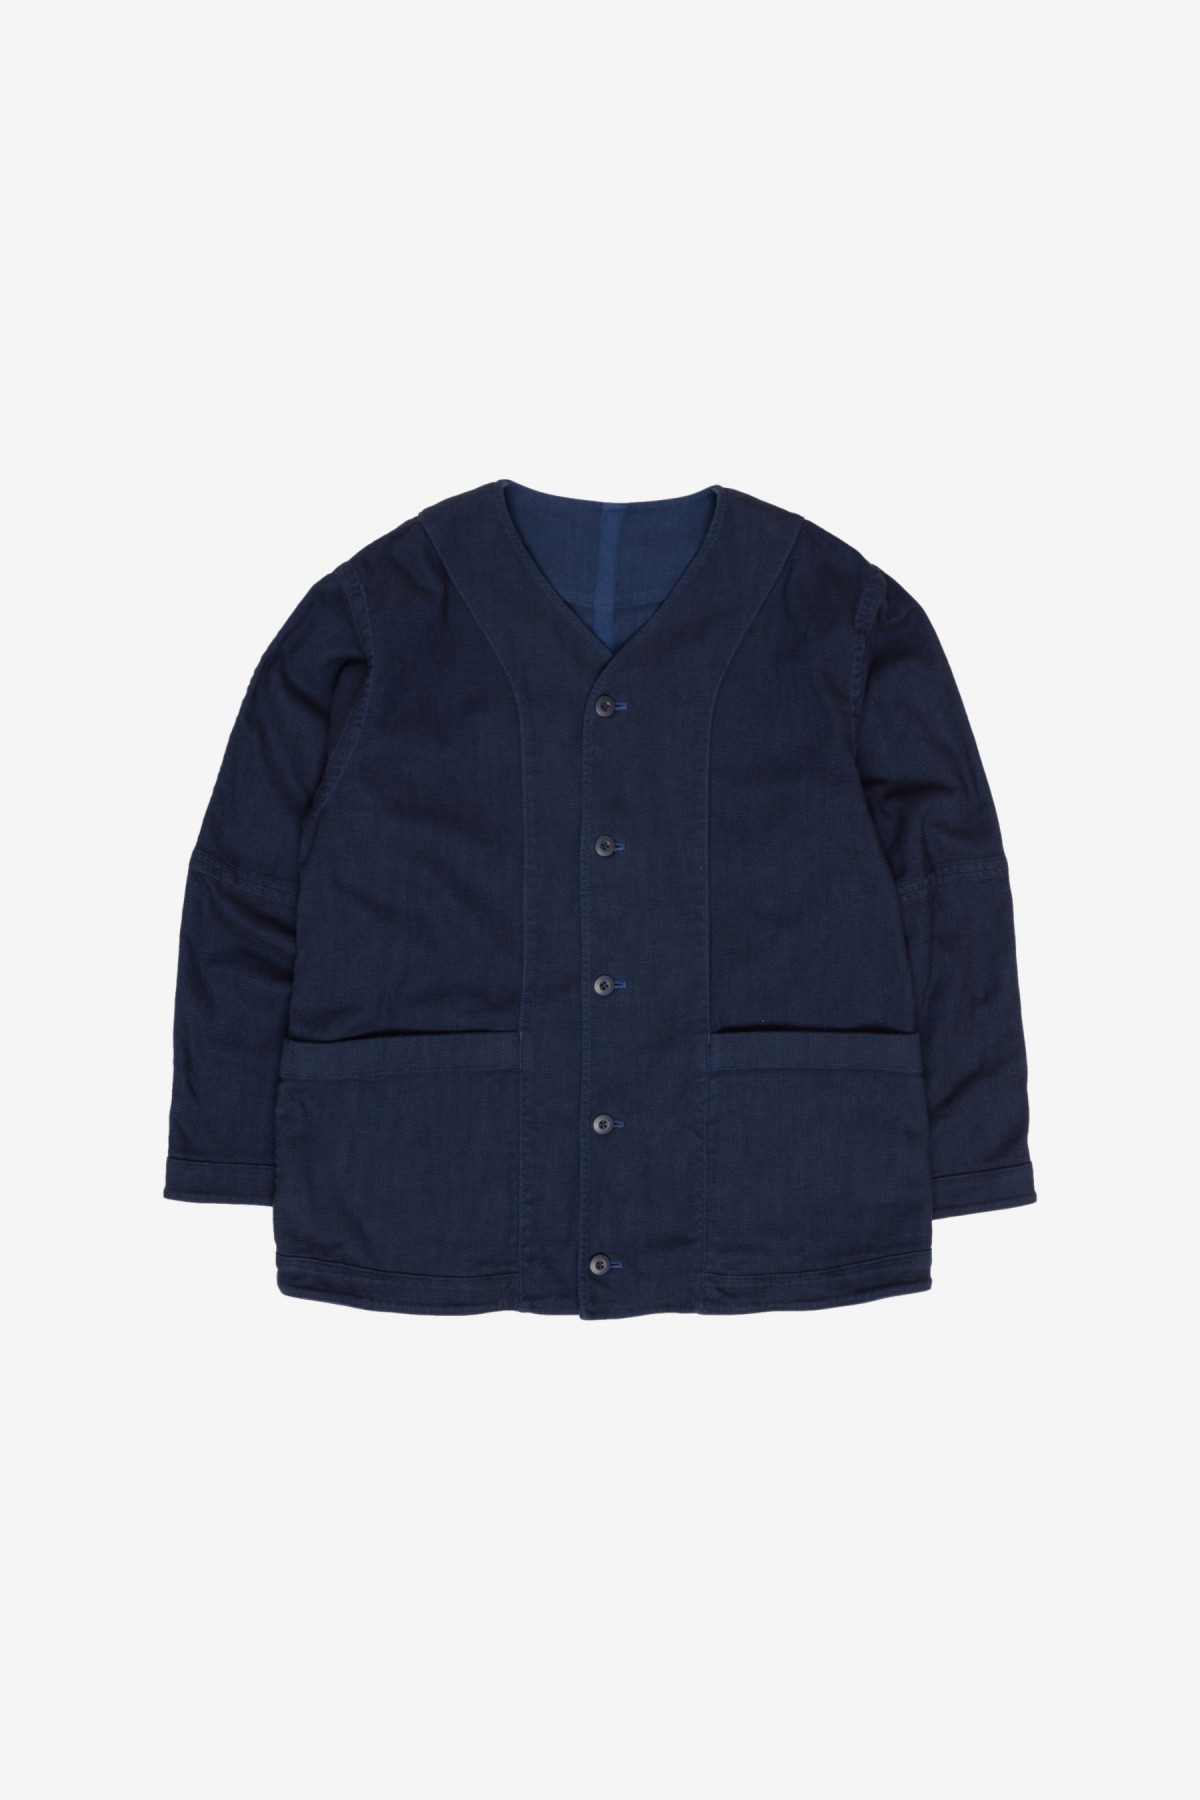 ts(s) Garment Dye Cotton Heavy Oxford Stretch Cloth Reversible Seam Taping Collarless Jacket in Navy